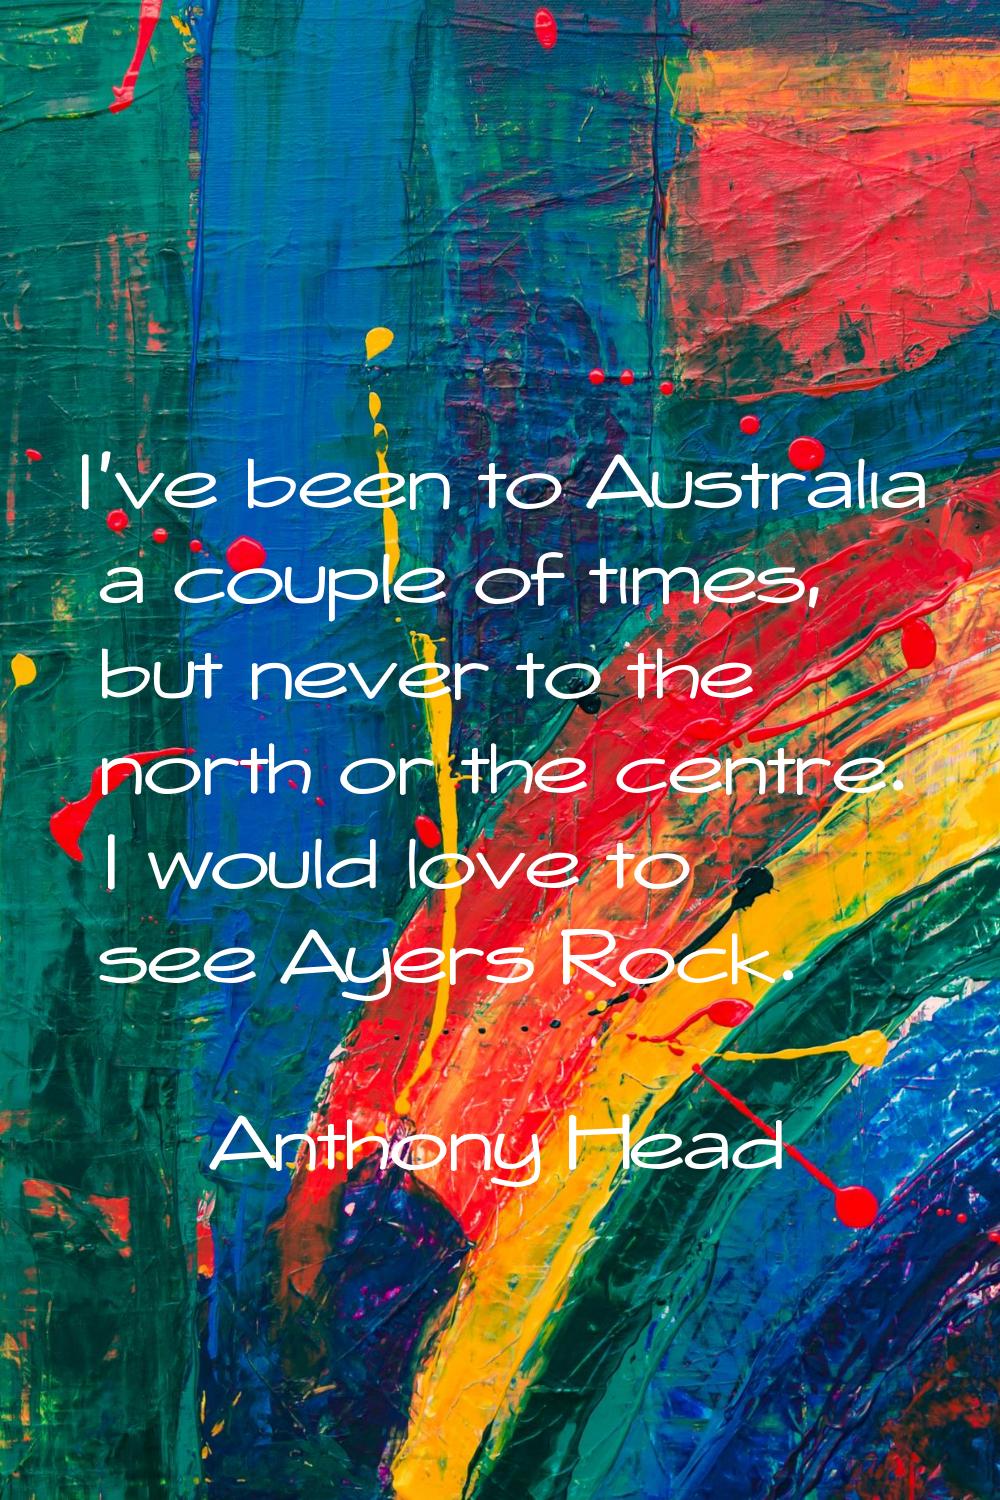 I've been to Australia a couple of times, but never to the north or the centre. I would love to see